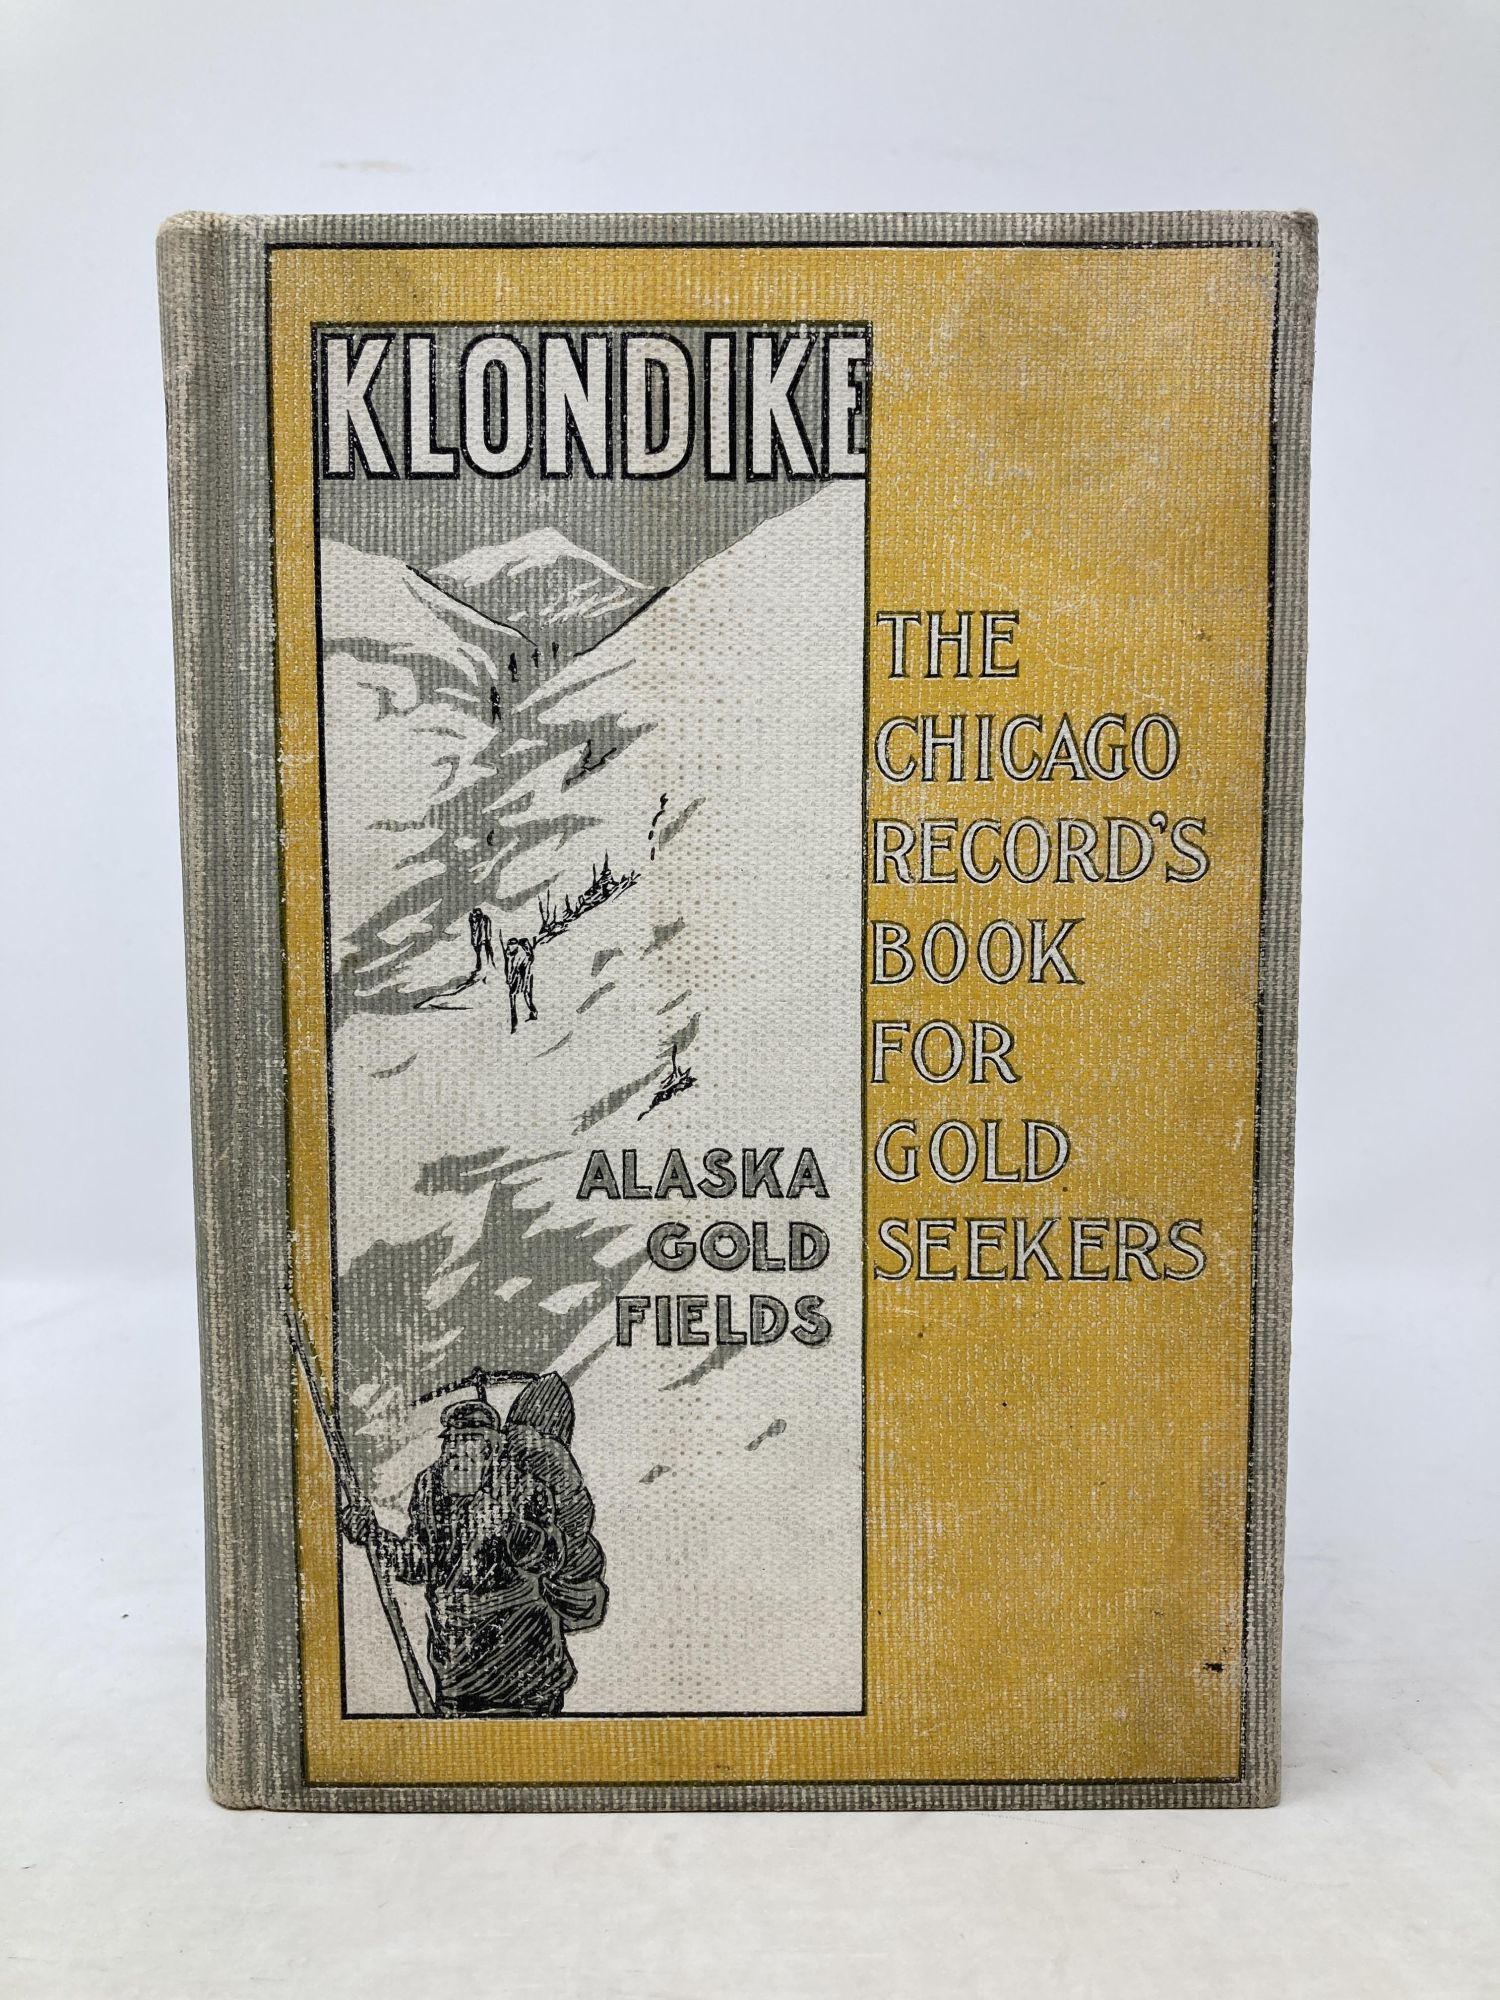 The Chicago Record - Klondike : The Chicago Record's Book for Gold Seekers